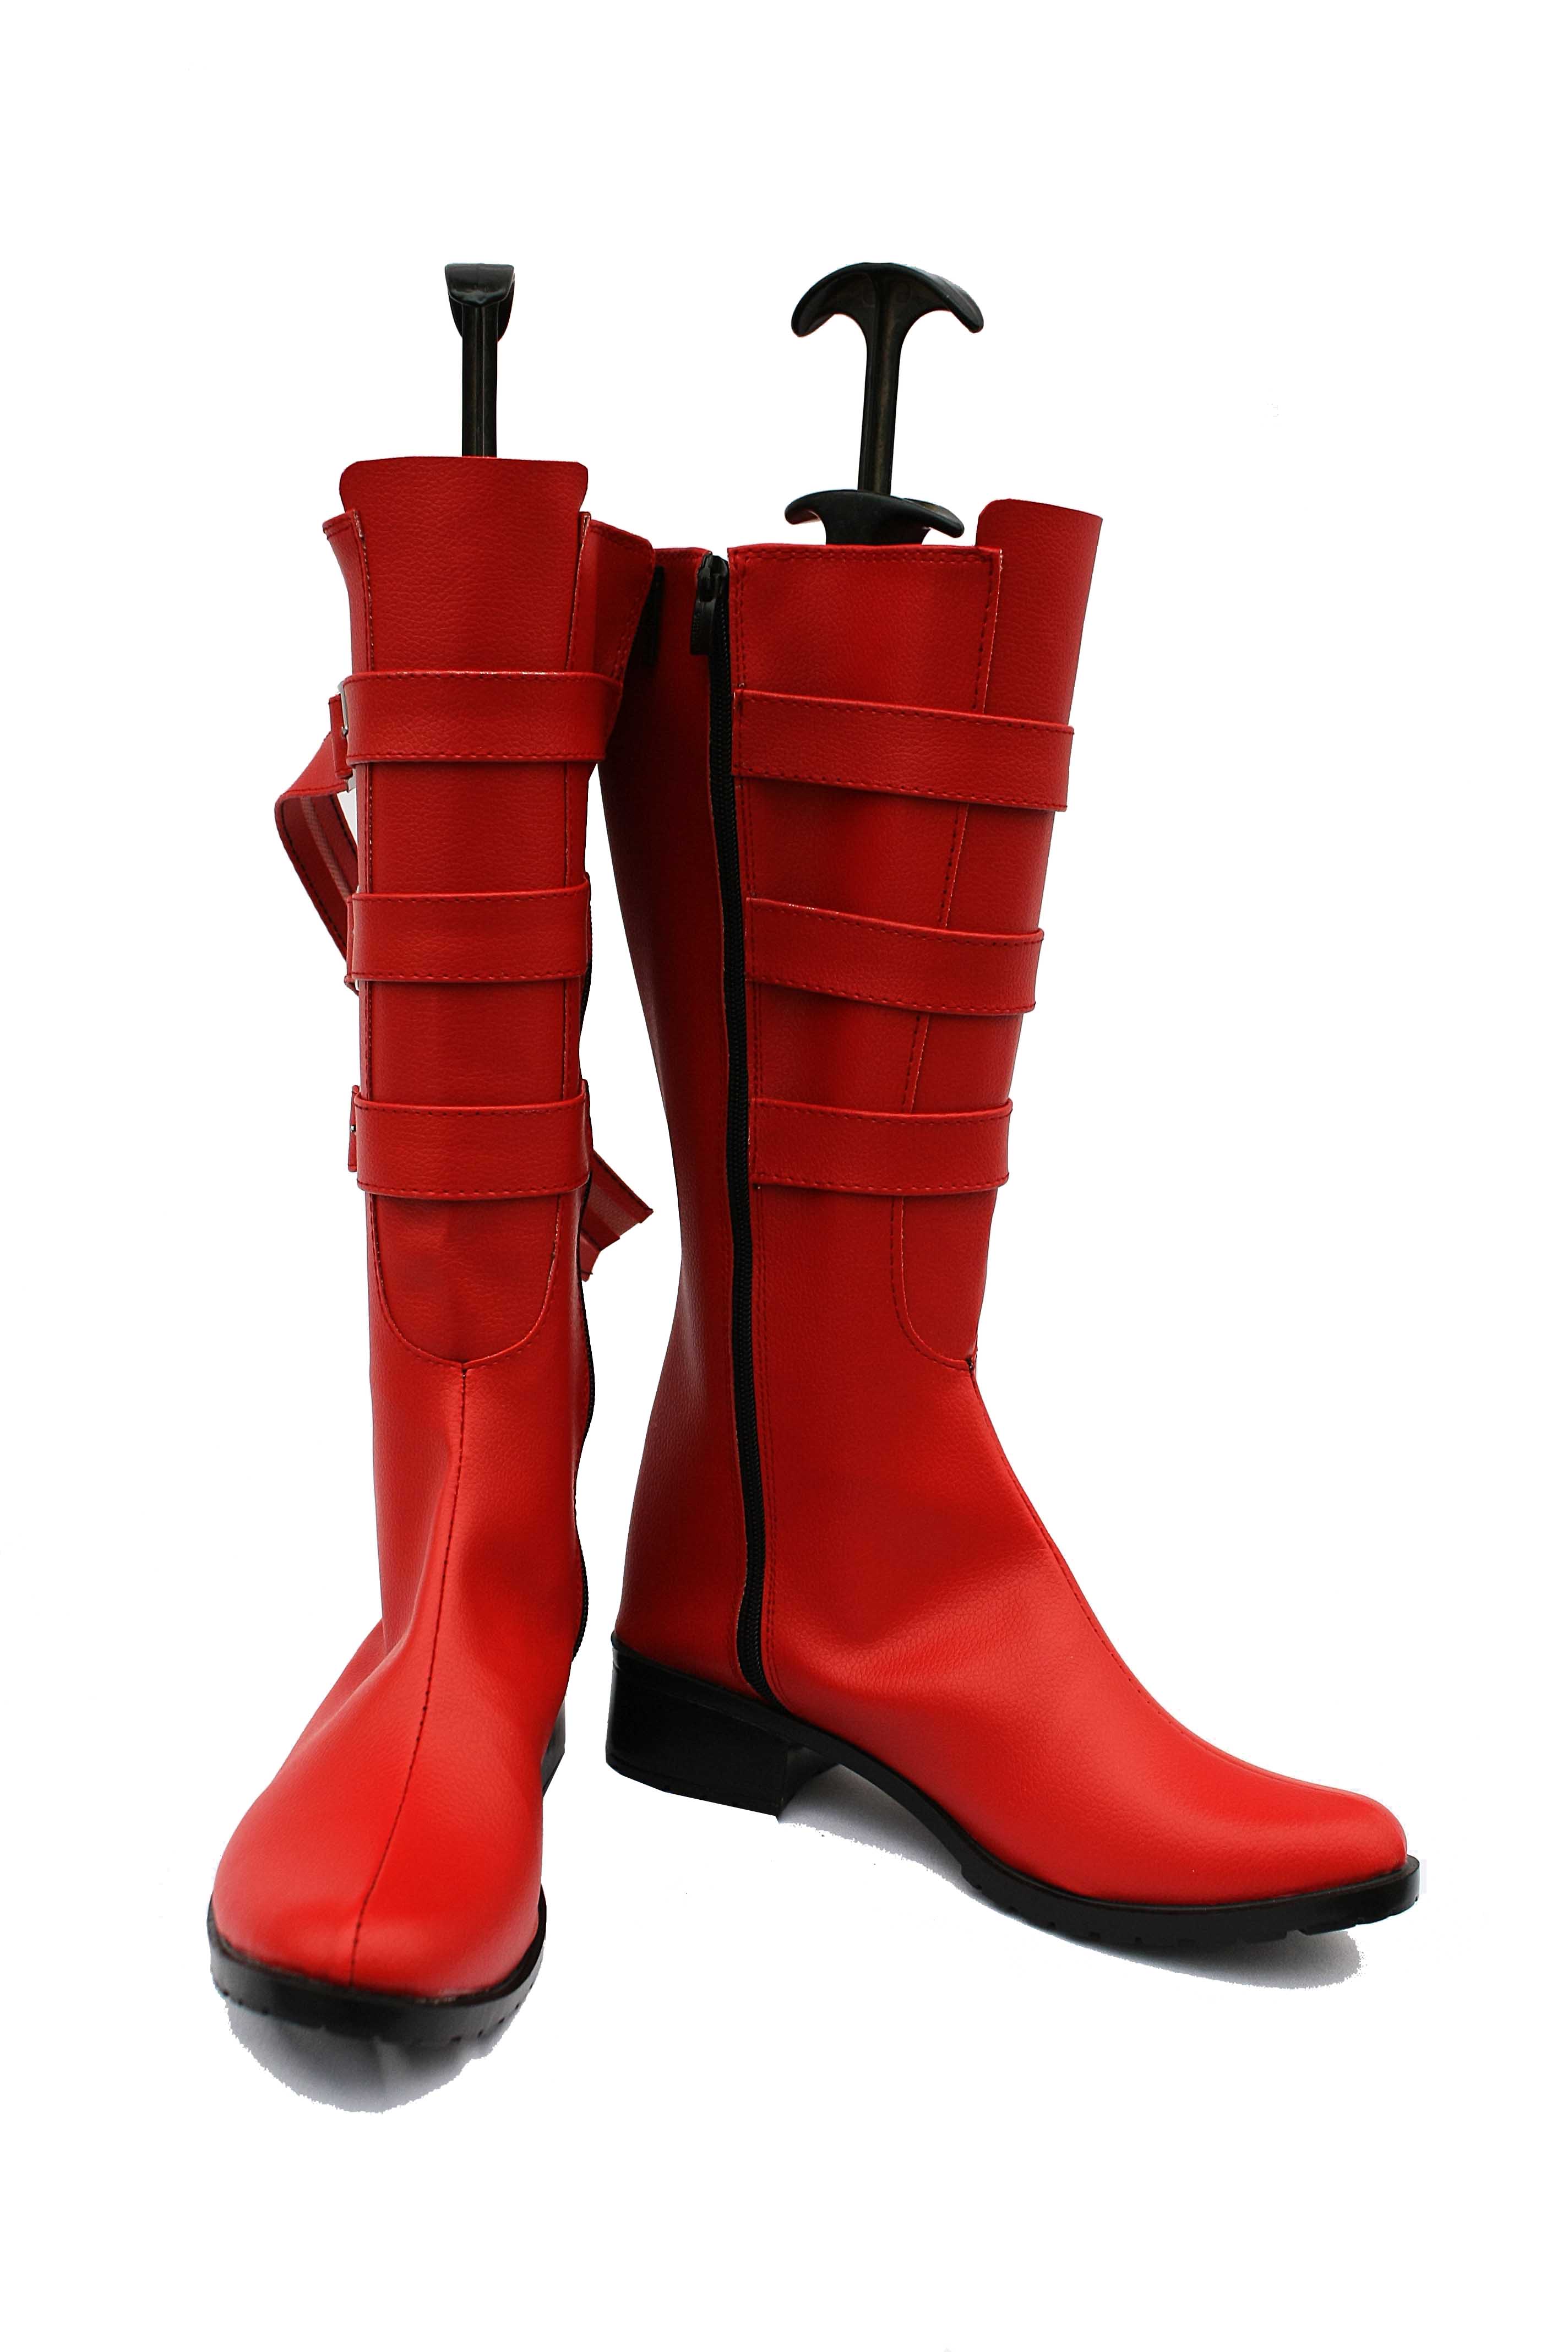 One Piece Nami Cosplay Boots 02